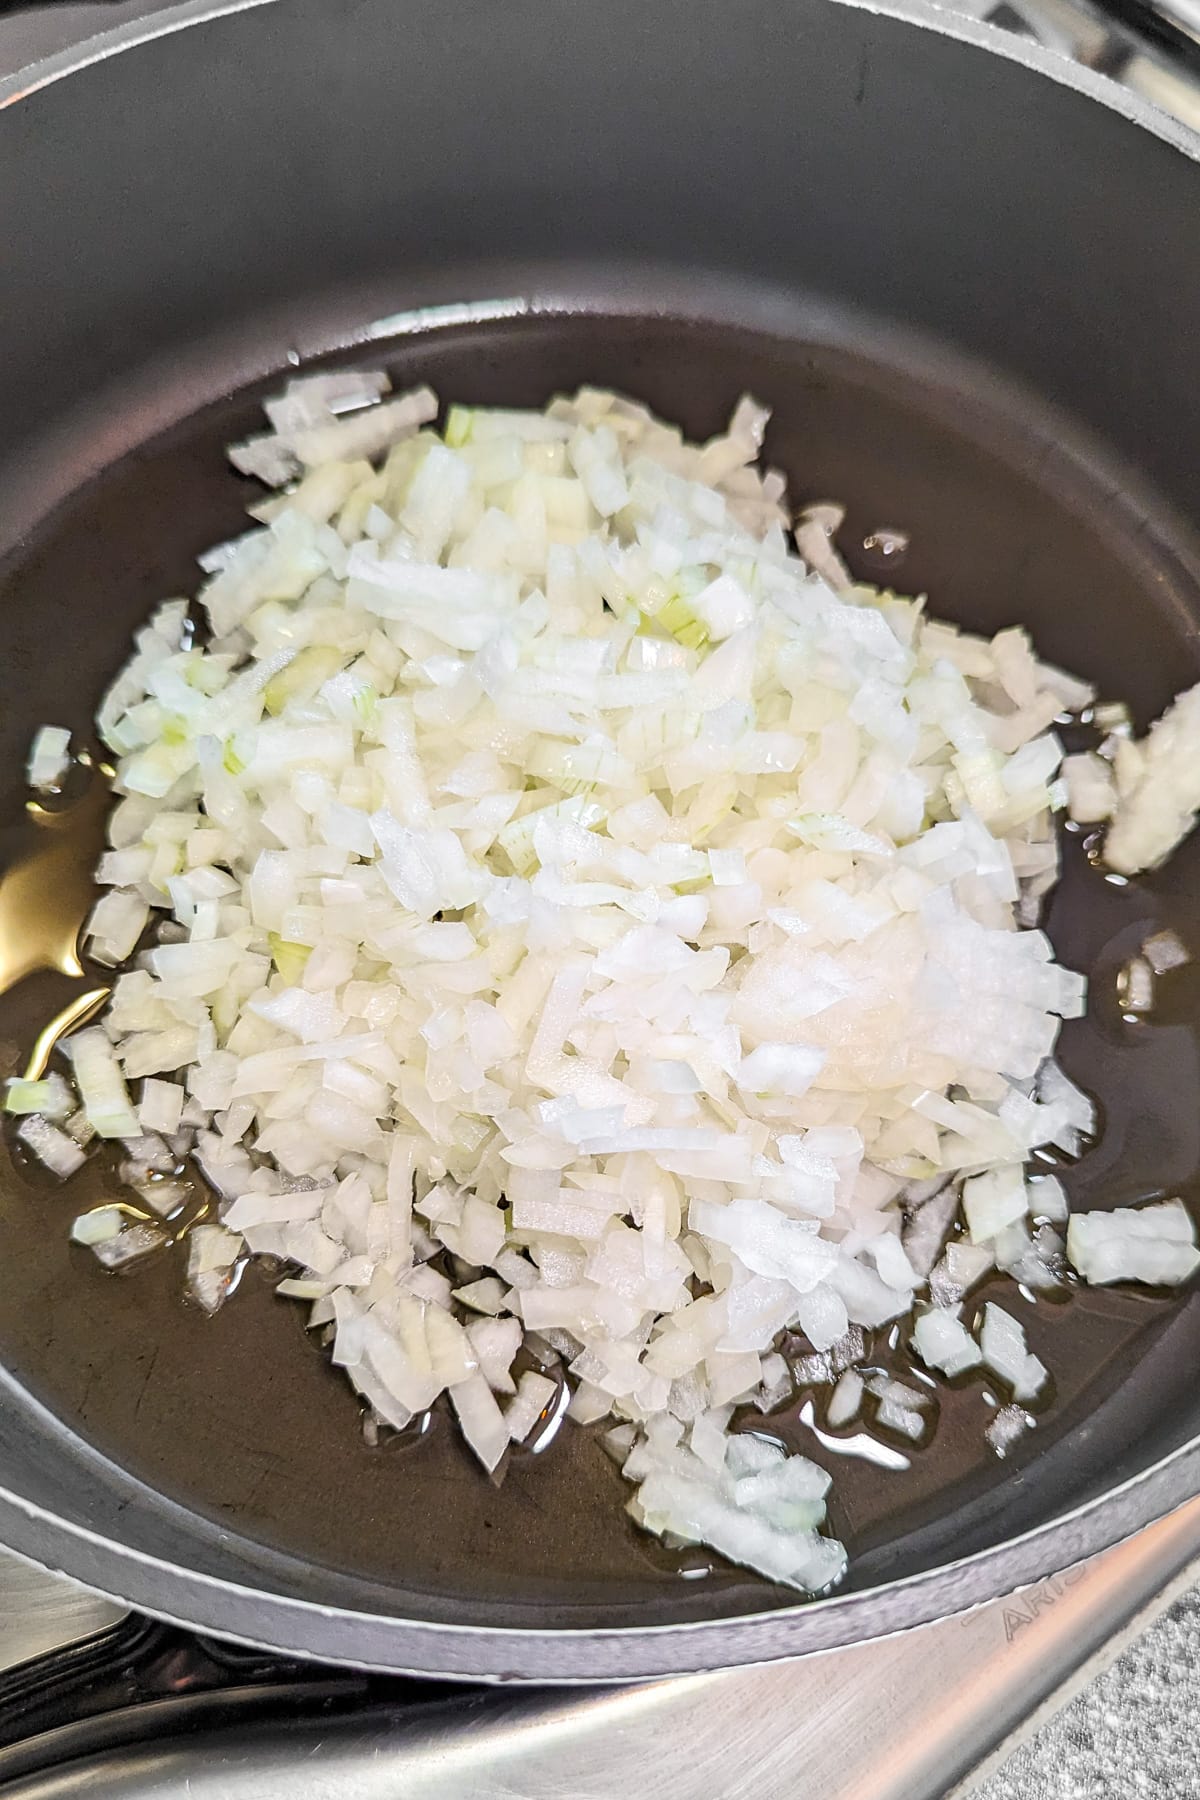 Diced onion in a frying pan with a little bit of oil.